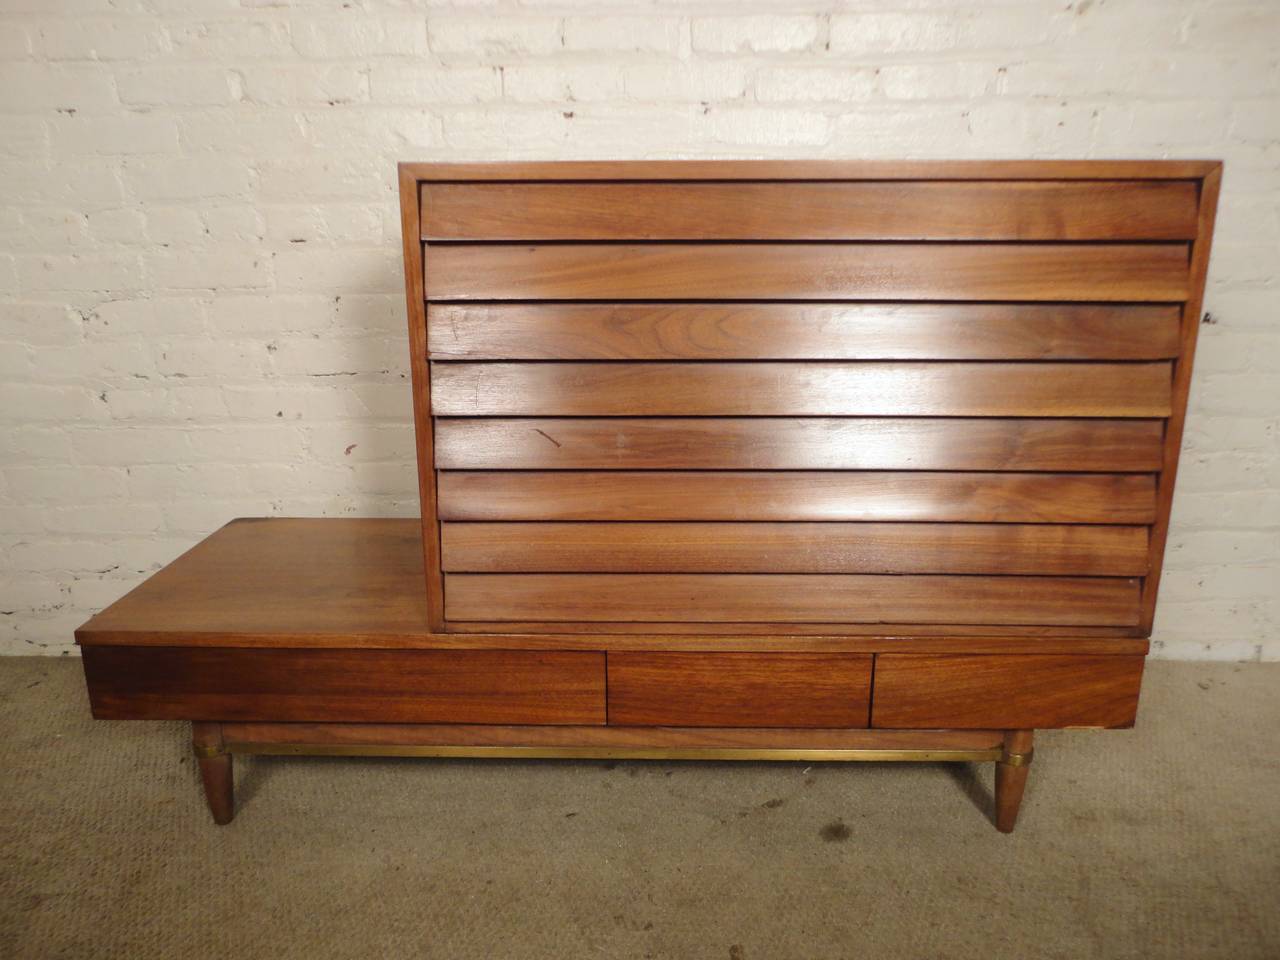 Wild Louvered Front Dresser by Merton L. Gershun 1